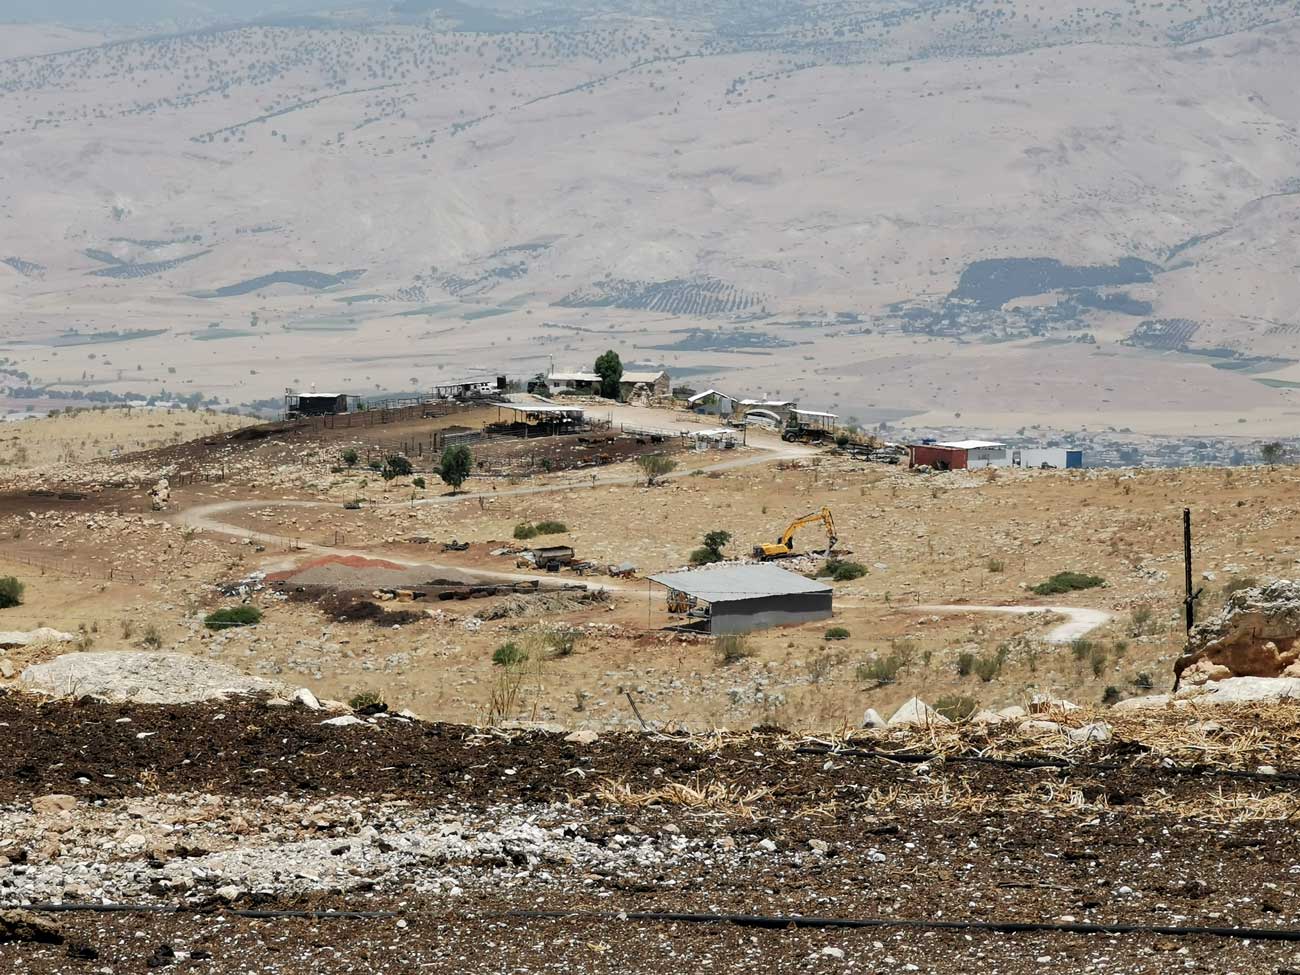 The Um Zuqa farm is one of six “farms” set up by settlers in the northern Jordan Valley in the past five years. The farm was built in 2016 on a site that housed the Palestinian village of Khirbet al-Mzoqah, which Israel demolished after occupying the West Bank.According to a calculation prepared by Kerem Navot at B’Tselem’s request, settlers from Um Zuqa “farm” have taken 14,979 dunams – roughly twothirds of the nature reserve. Settlers from the farm are already cultivating 99 dunams of this land. Photo by 